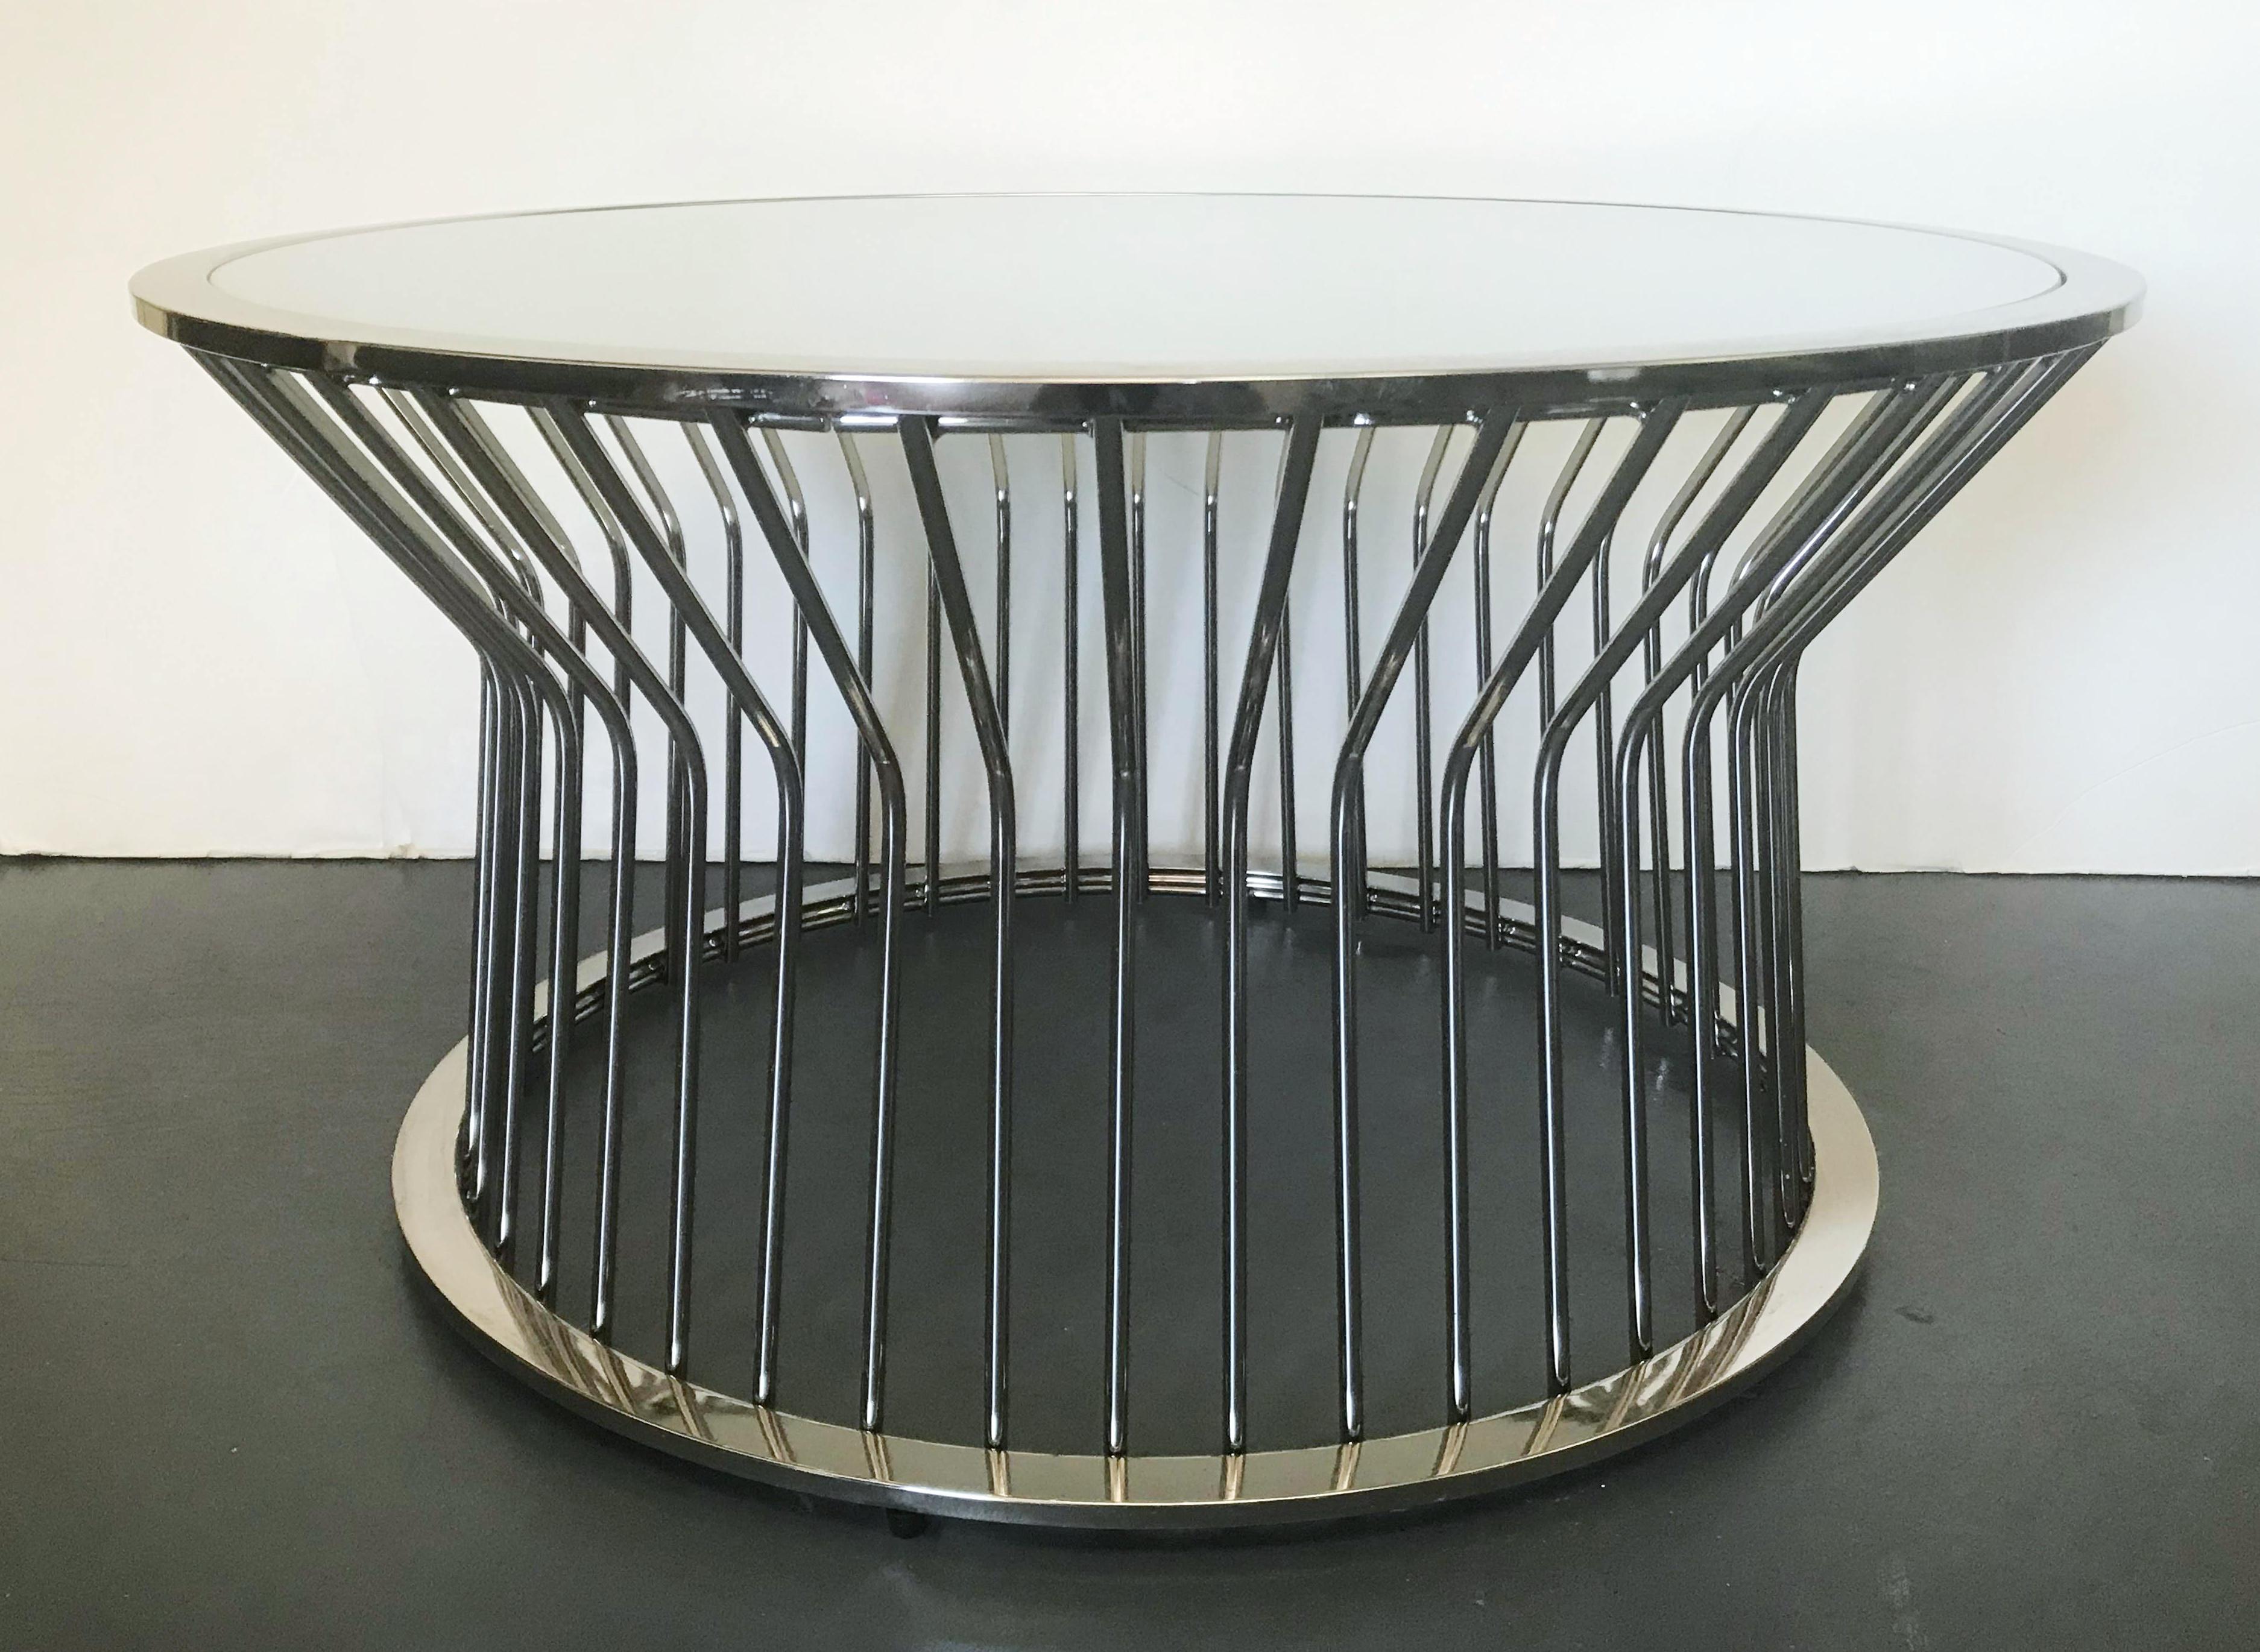 Vintage round coffee or cocktail table with chrome base and frosted glass top / Made in the USA, circa 1970s
Measures: Diameter 35 inches, height 18 inches
1 available in stock in Palm Springs
Order reference #: FABIOLTD F171